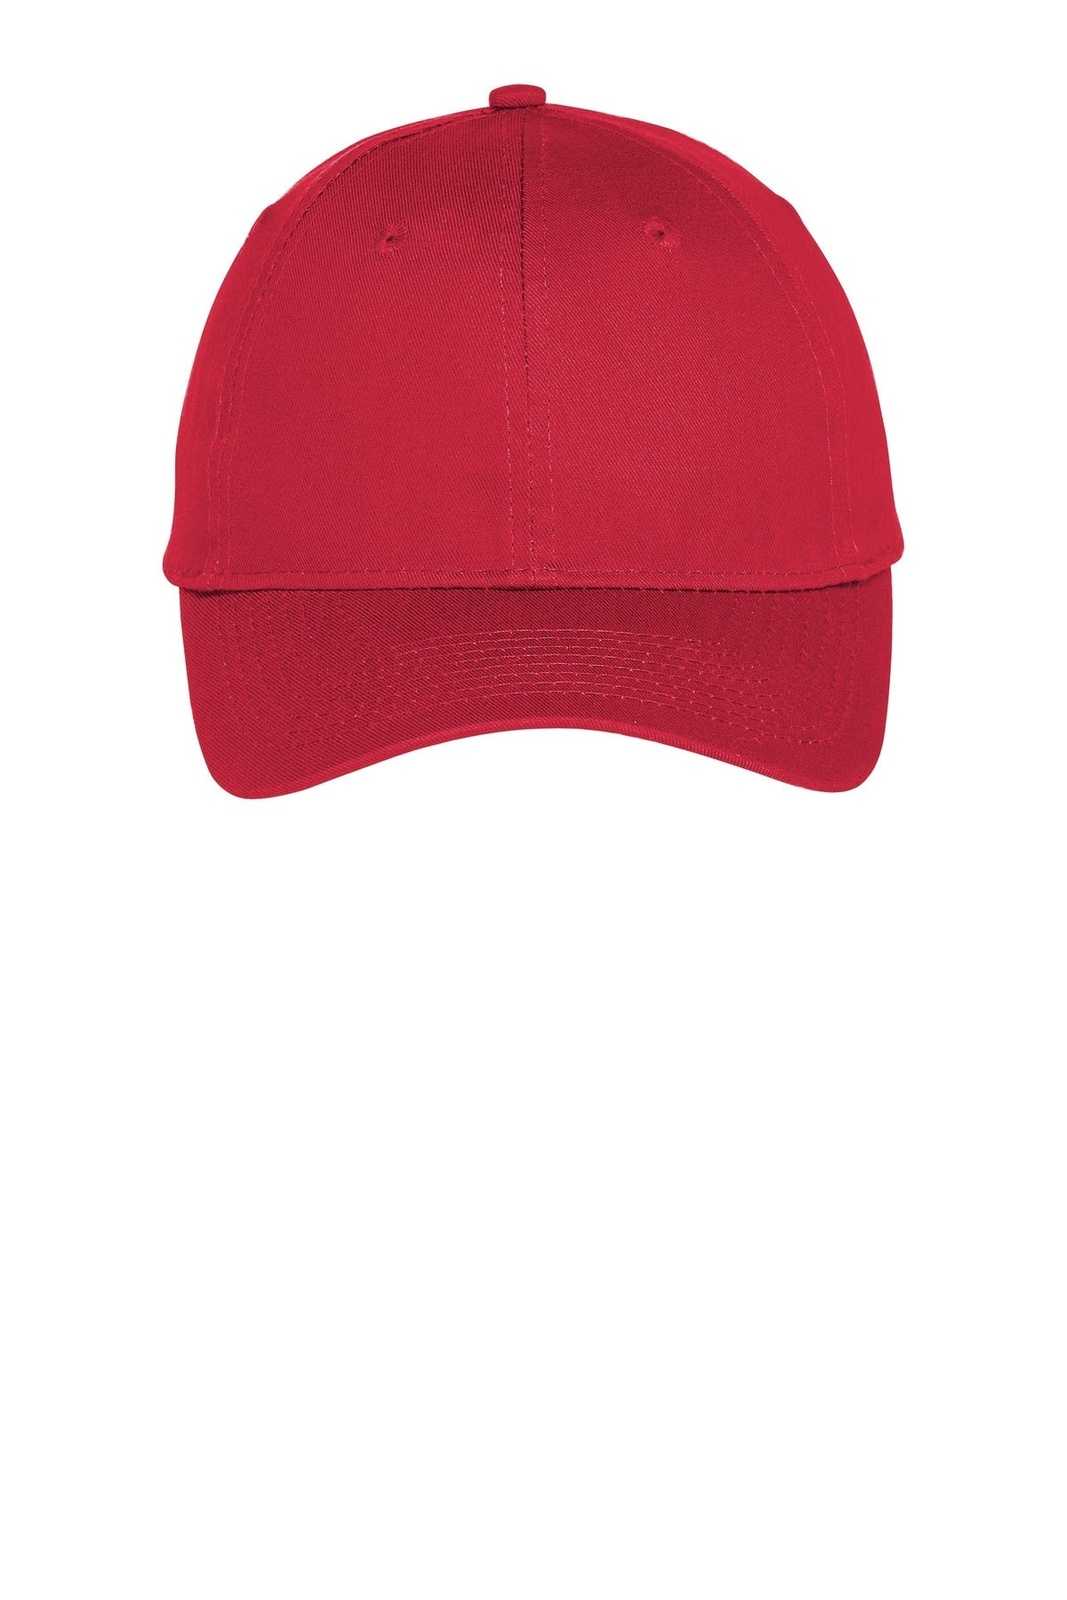 Port & Company C914 Six-Panel Unstructured Twill Cap - True Red - HIT a Double - 1